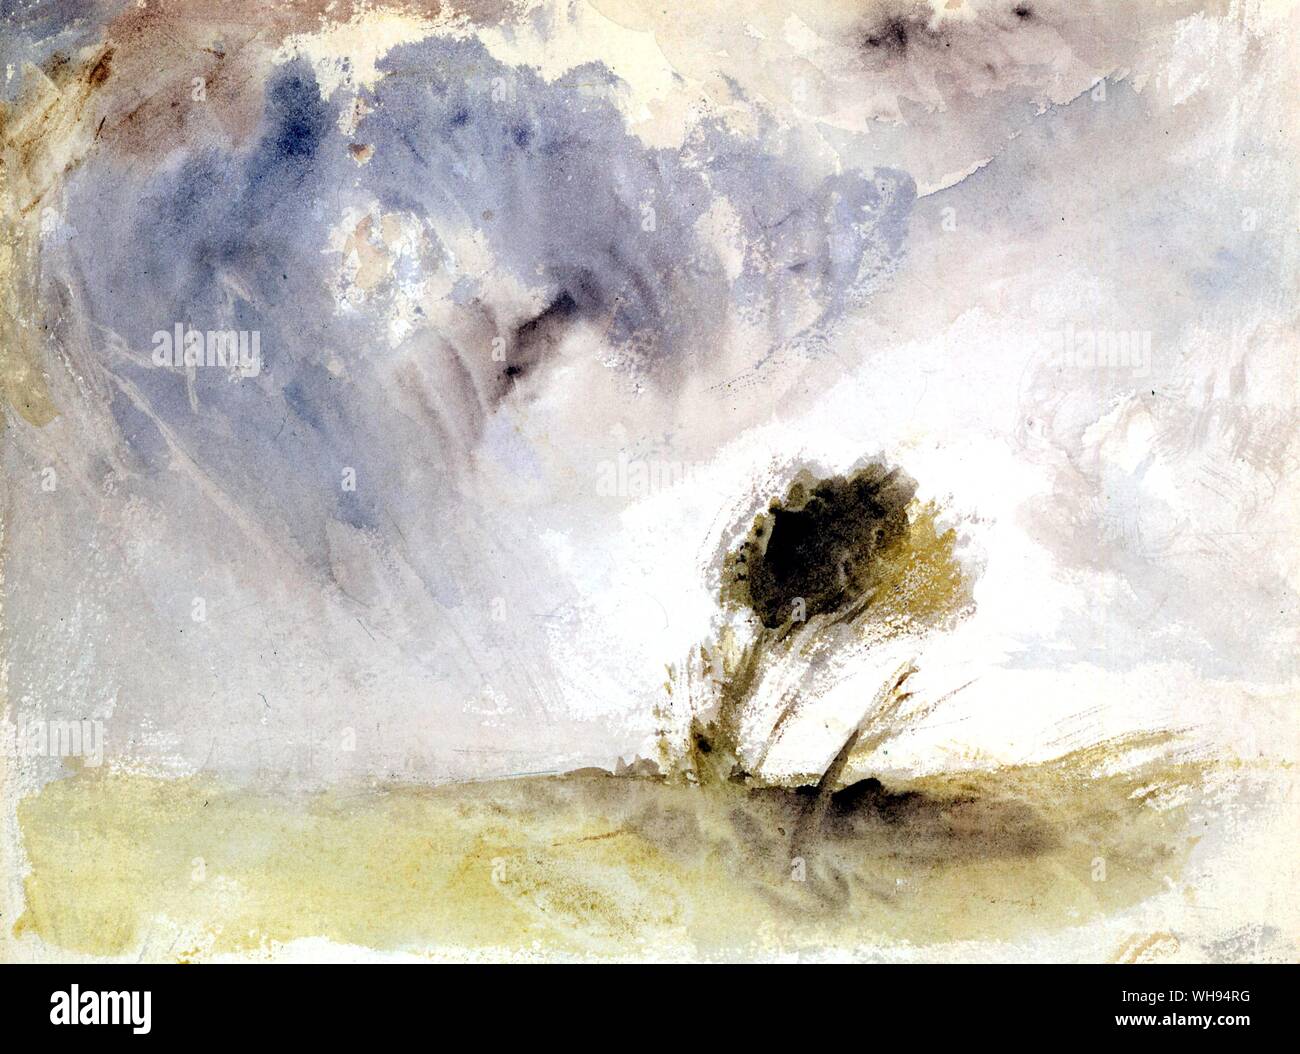 A Tree in a Storm by Josph Mallord William Turner Stock Photo